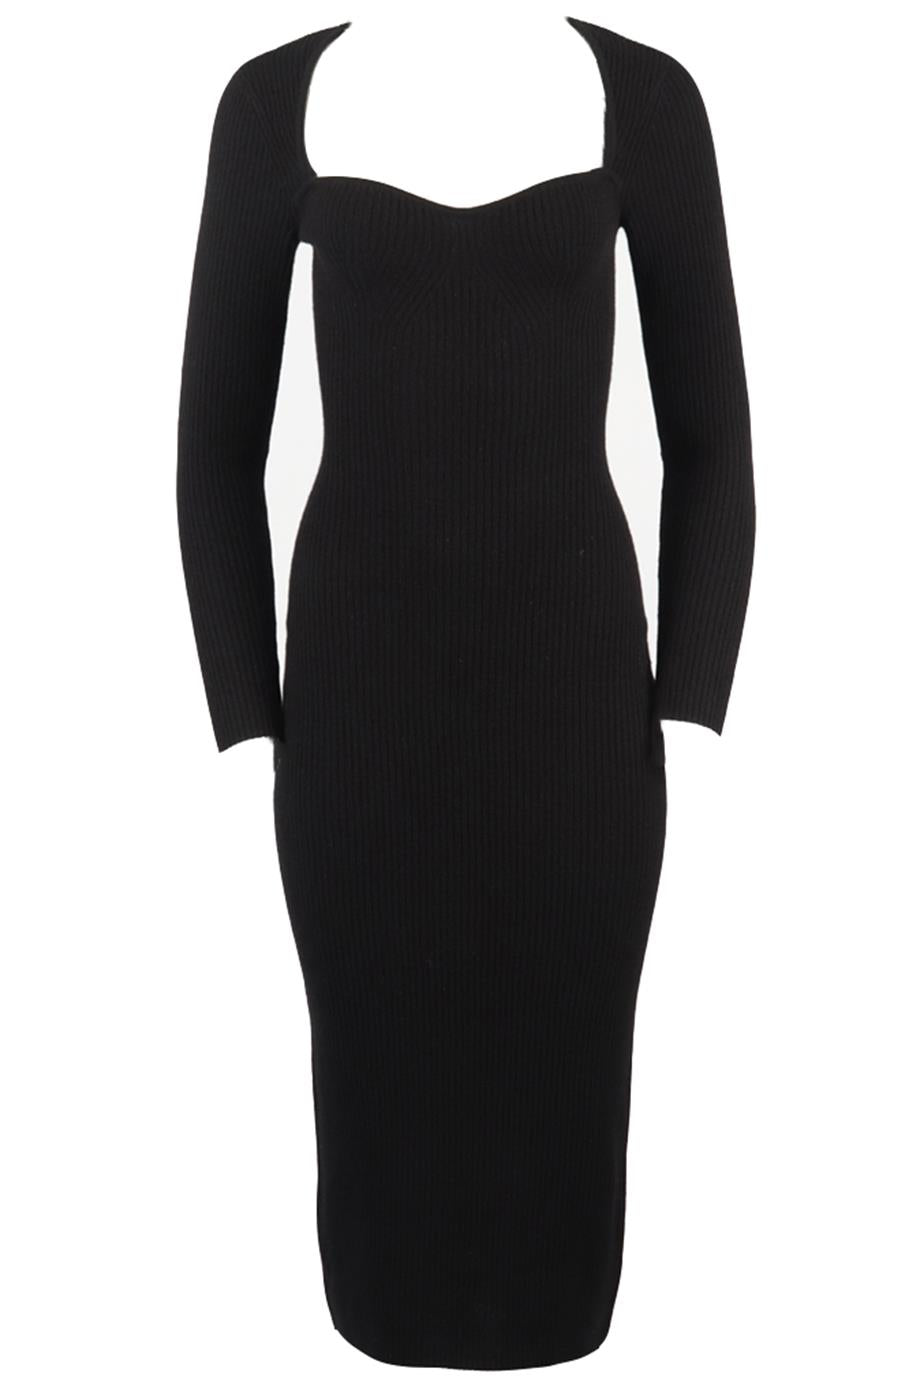 REFORMATION RIBBED CASHMERE MIDI DRESS SMALL